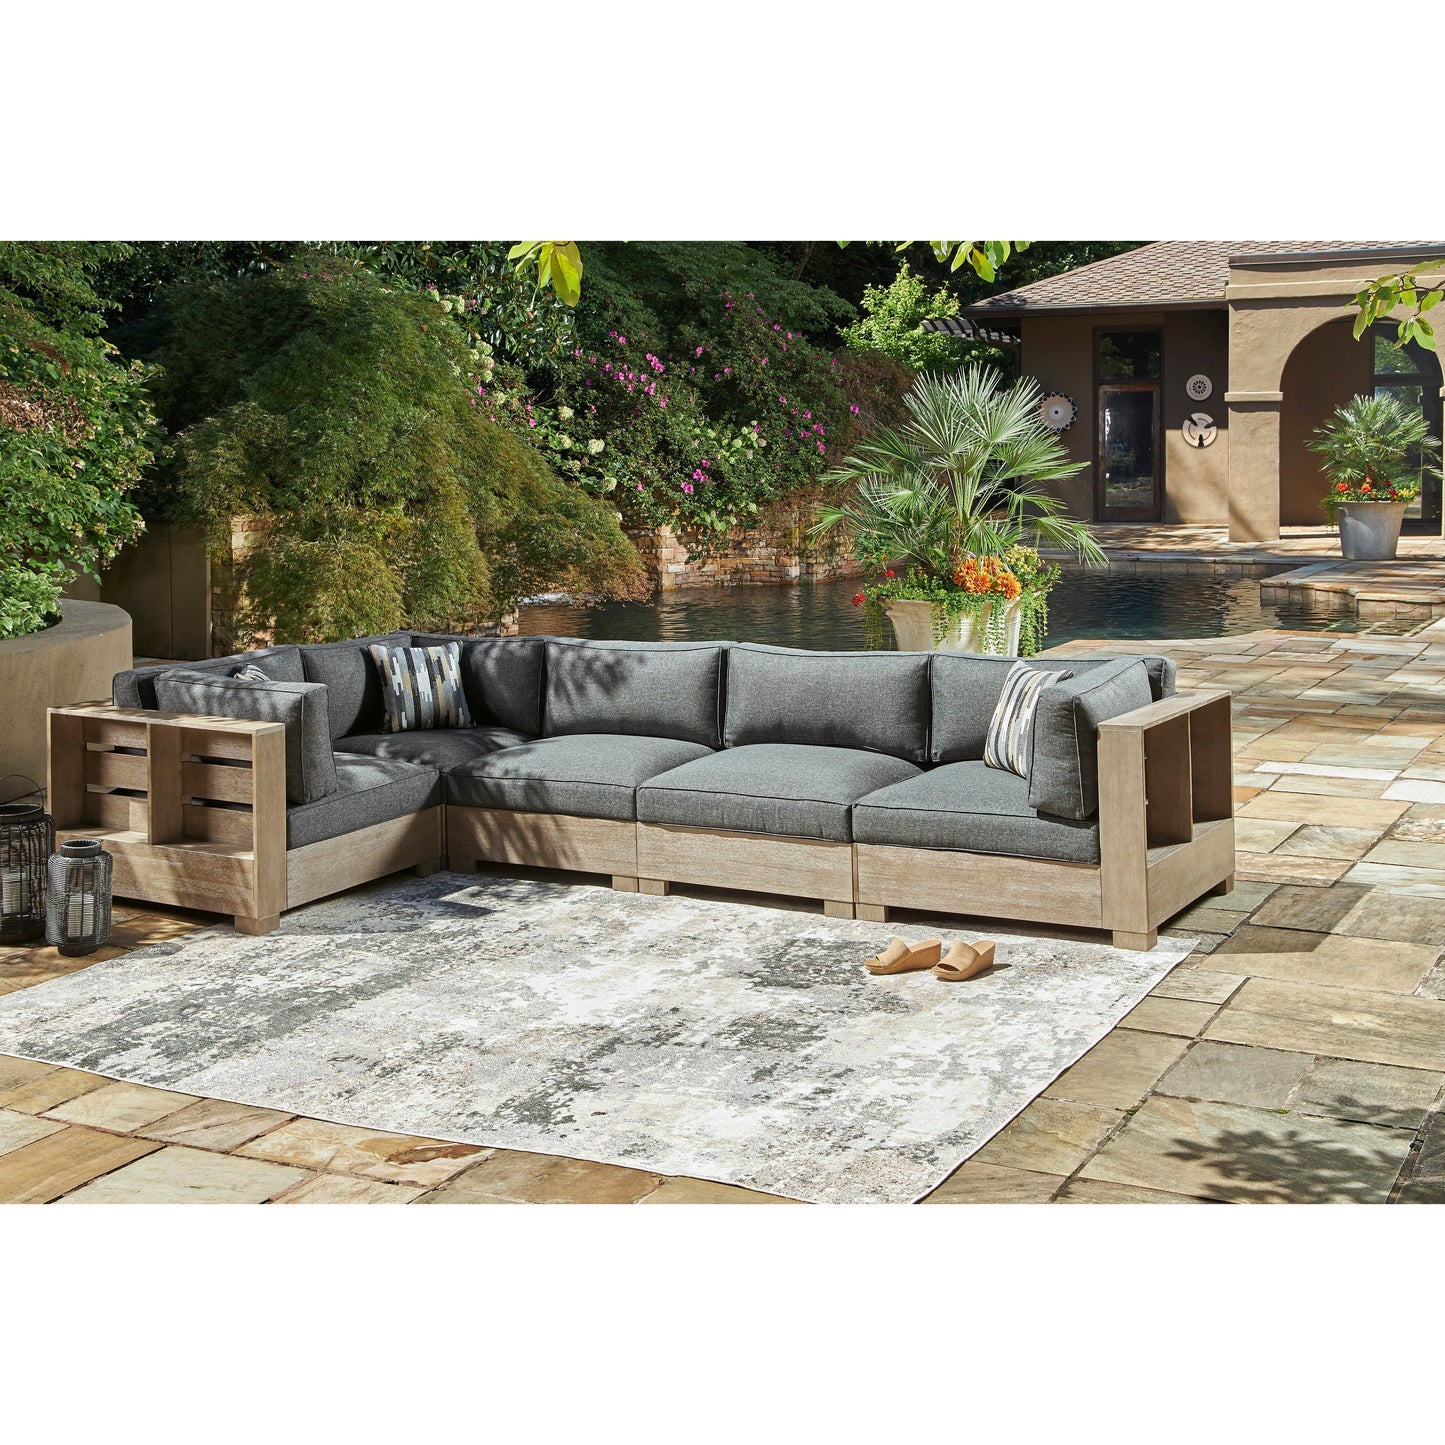 CITRINE PARK 5-PC OUTDOOR SECTIONAL